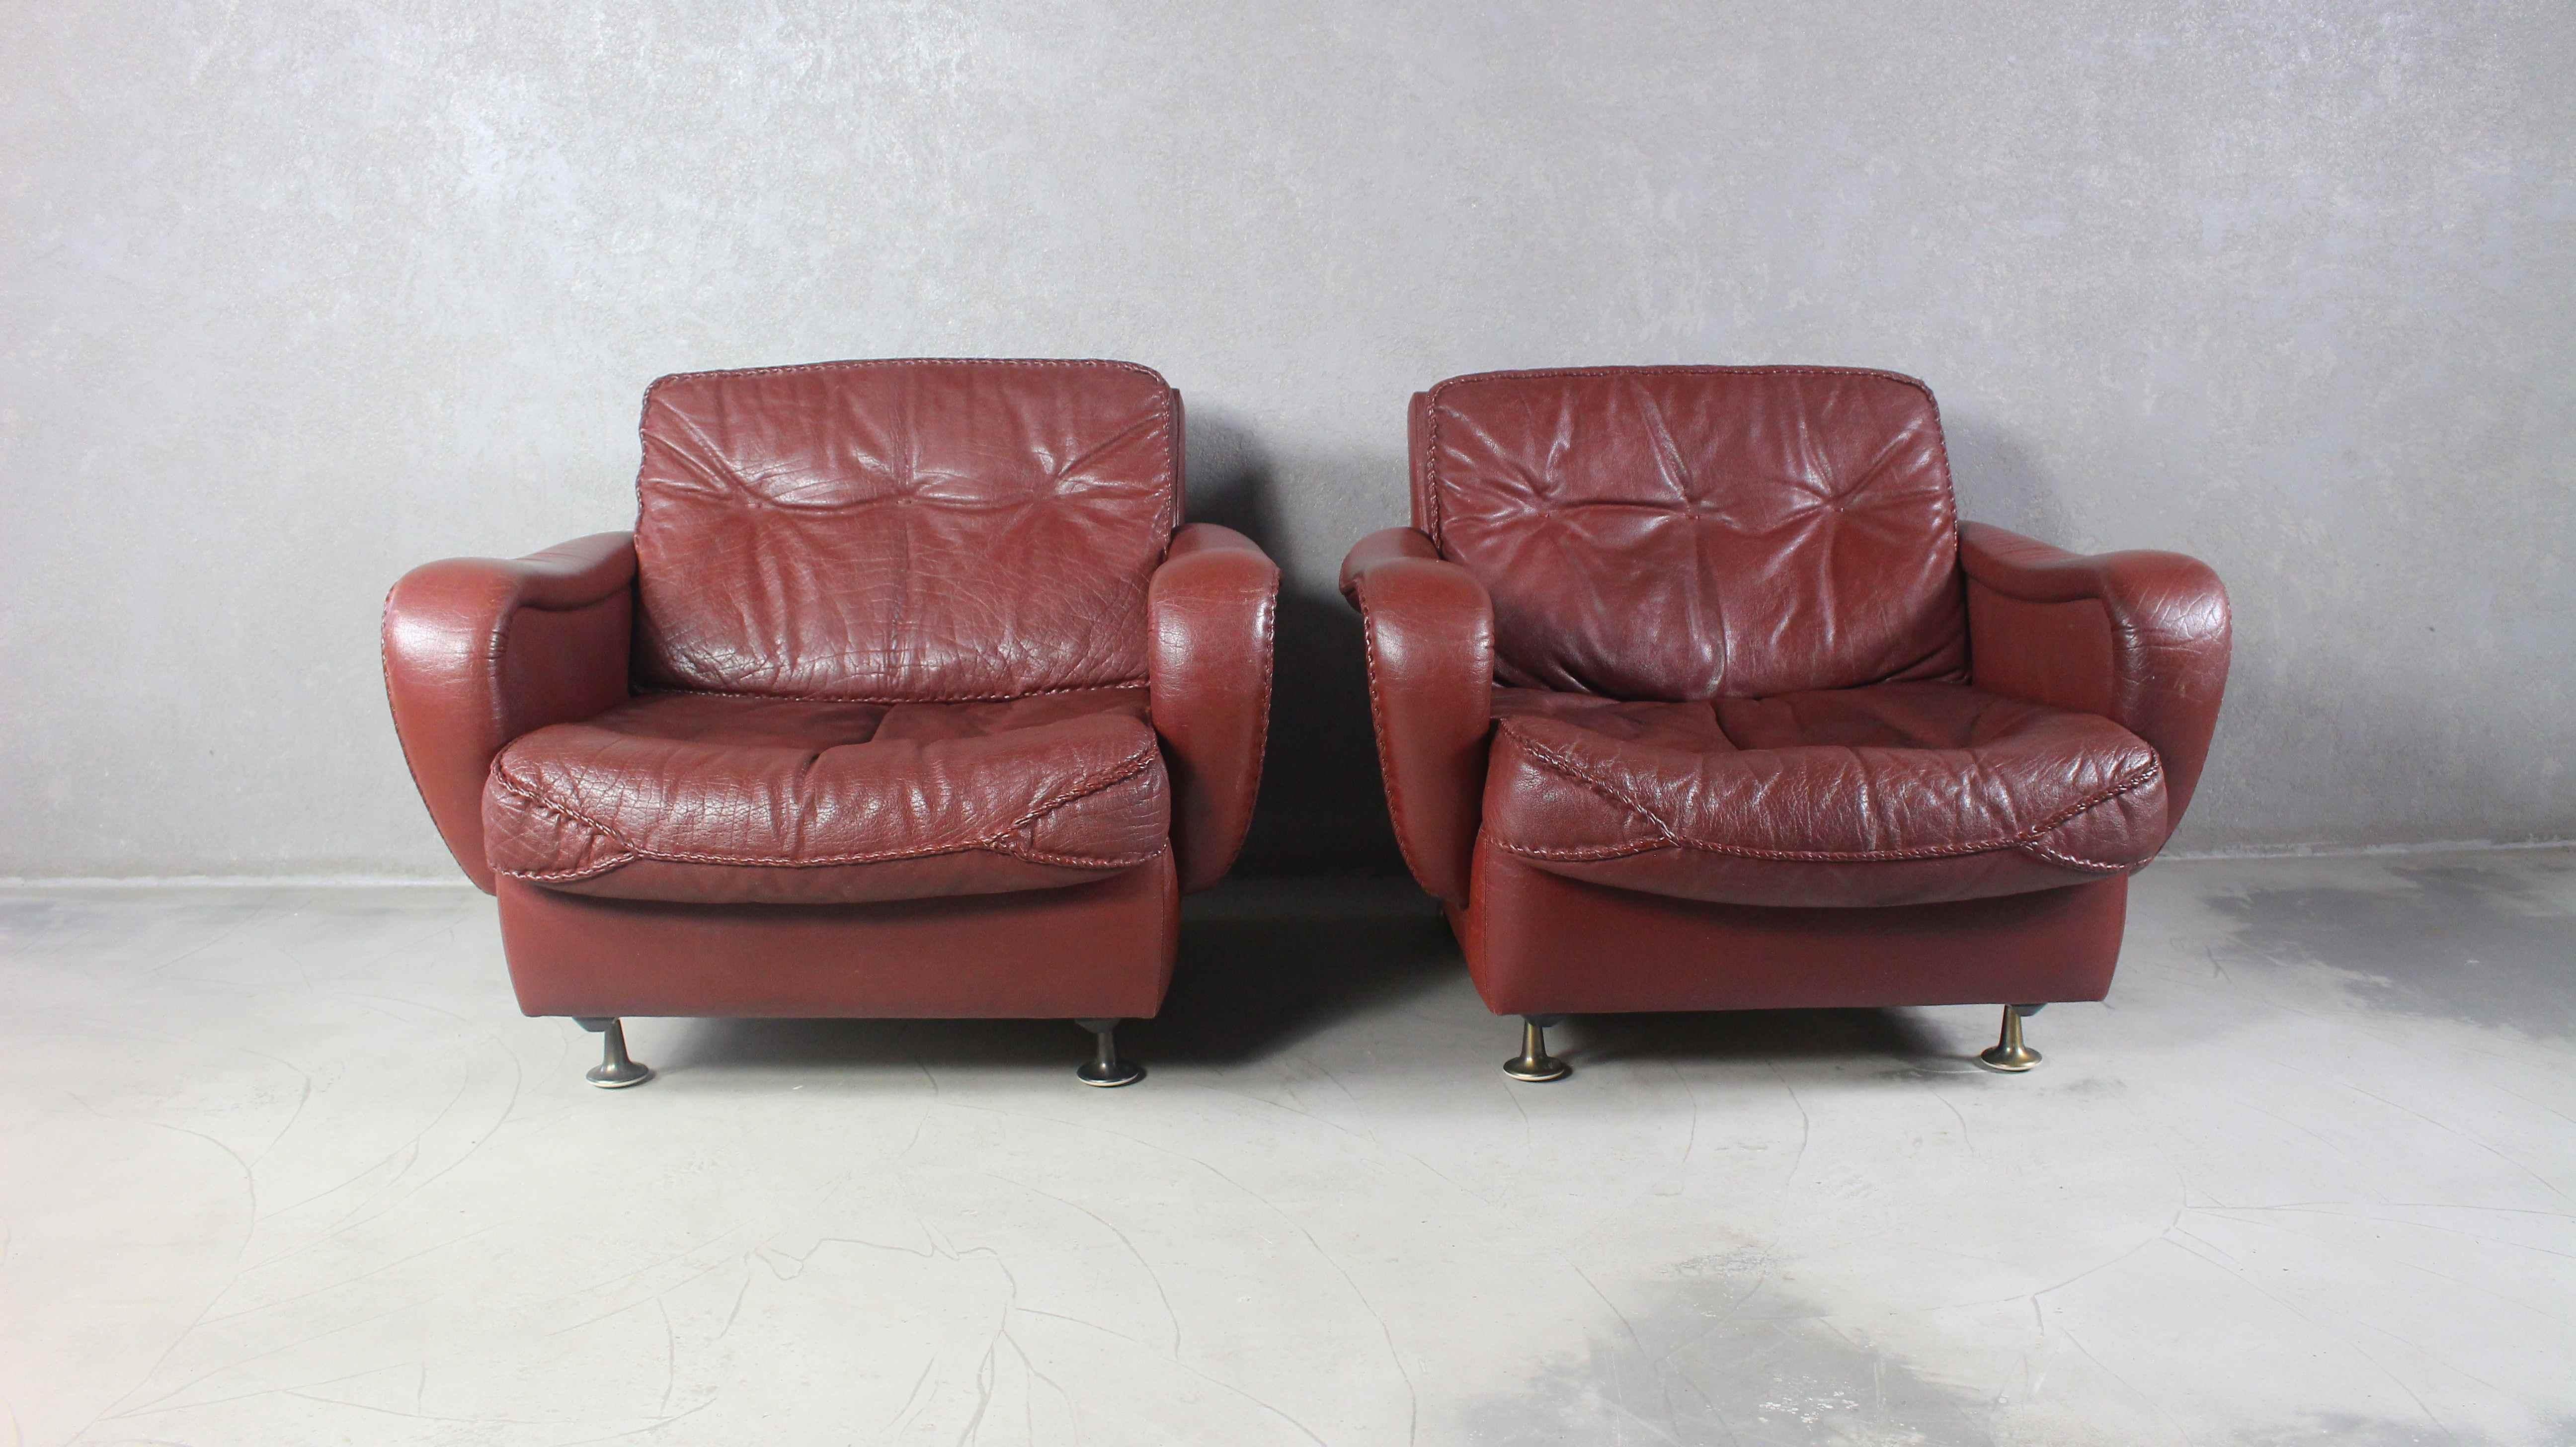 A very stylish Danish 1970s armchairs, designed by notable design duo Acton Schubell and IB Madsen.
The armchairs is upholstered throughout in genuine textured Buffalo leather, which is Brown in colour.
The backrest cushions feature light button